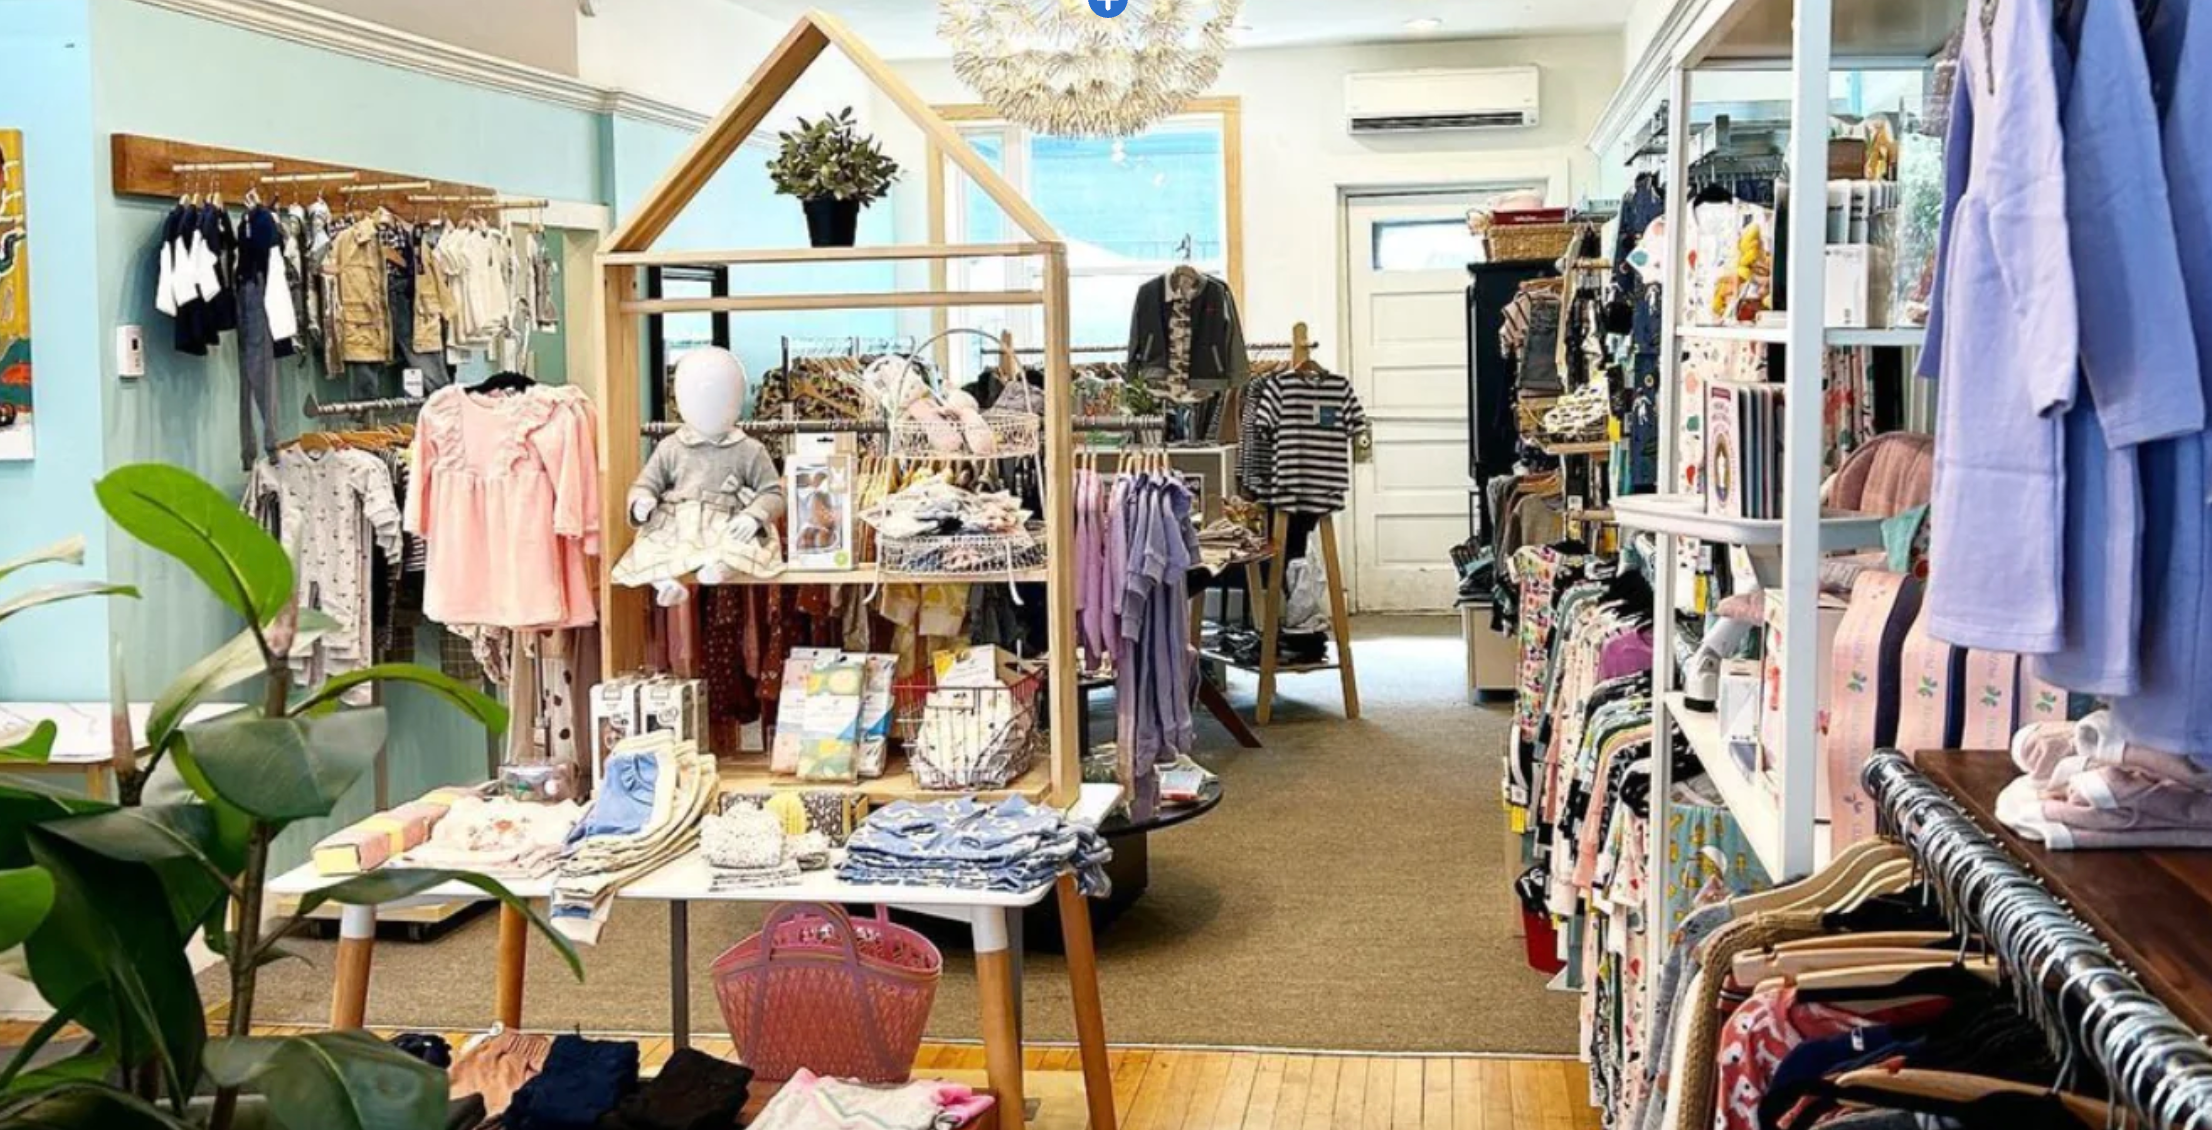 A PHOTO OF THE INSIDE OF TEENY BEE BOUTIQUE VIEWED FROM THE FRONT WINDOW.